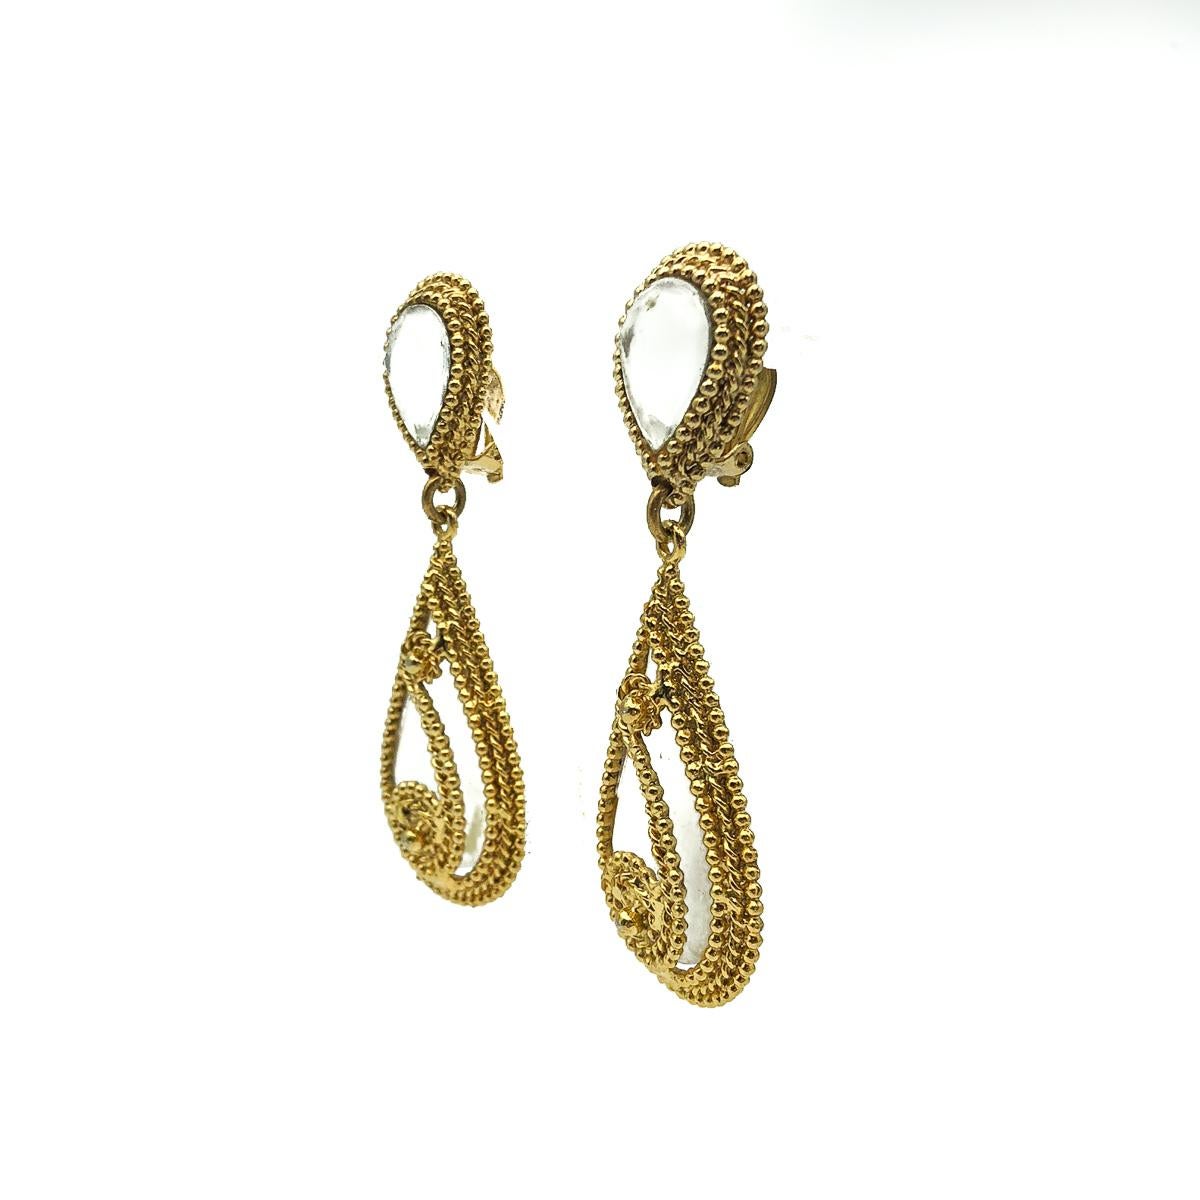 Striking statement Vintage Swirl Earrings, most likely French. Crafted with high quality gold plated metal and opaque resin panels. In very good vintage condition, 8.3cms. A beautiful pair of statement earrings that find the perfect balance between